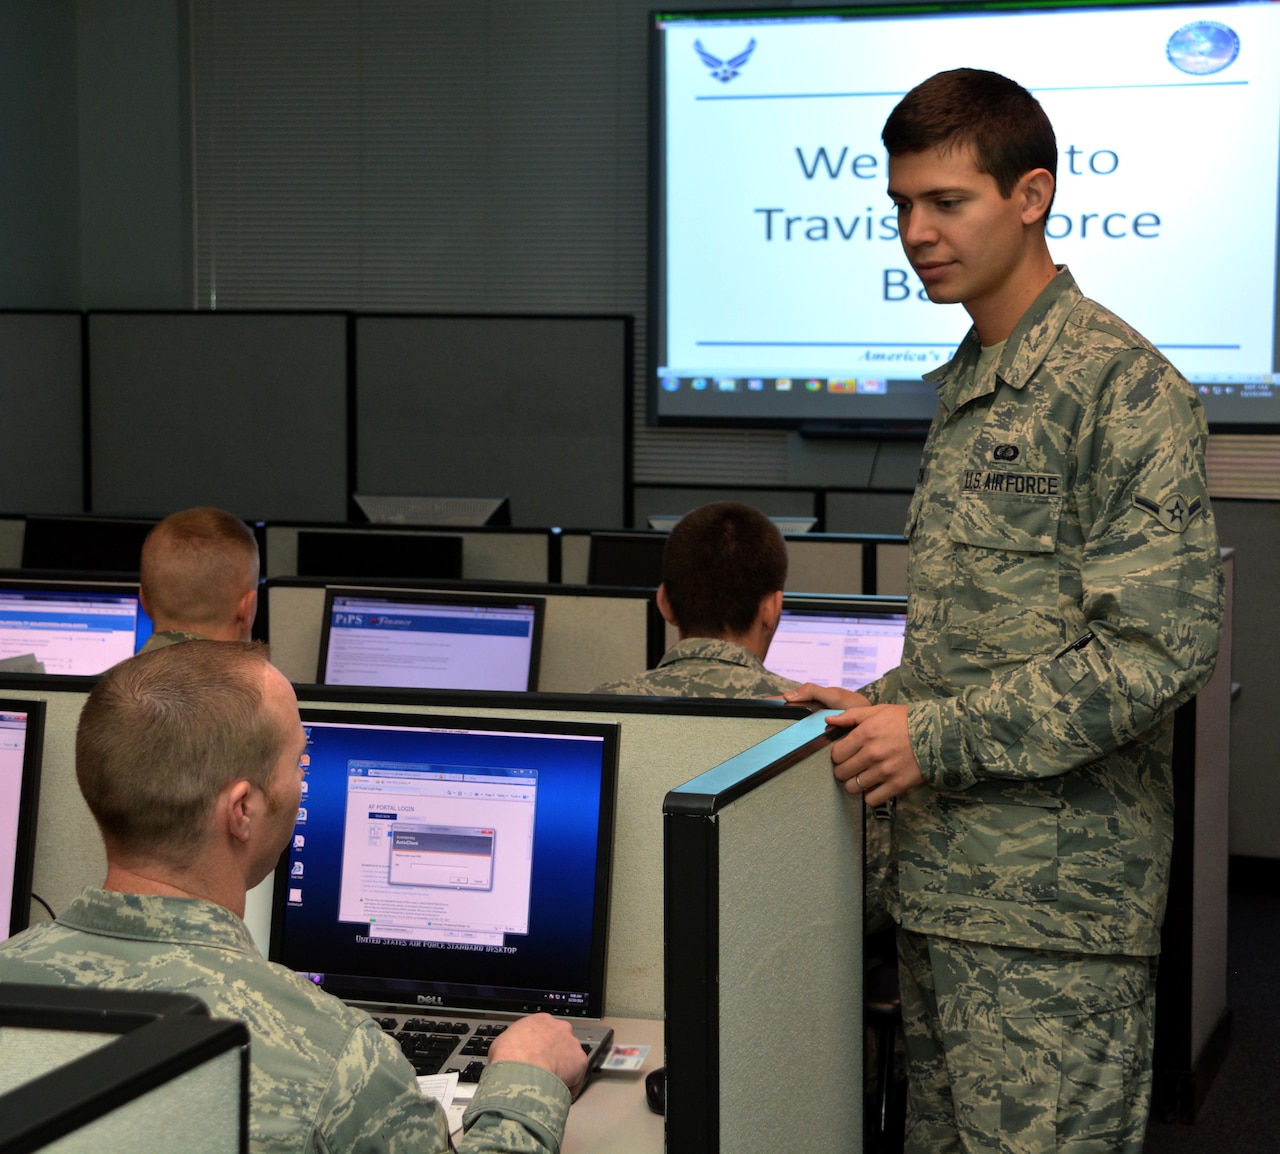 Air Force Airman Dimas Bernacchia assists an in-processing service member with a travel voucher at Travis Air Force Base, Calif., Dec. 10, 2014. Bernacchia holds dual citizenship in the United States and Italy. U.S. Air Force photo by Senior Airman Charles Rivezzo